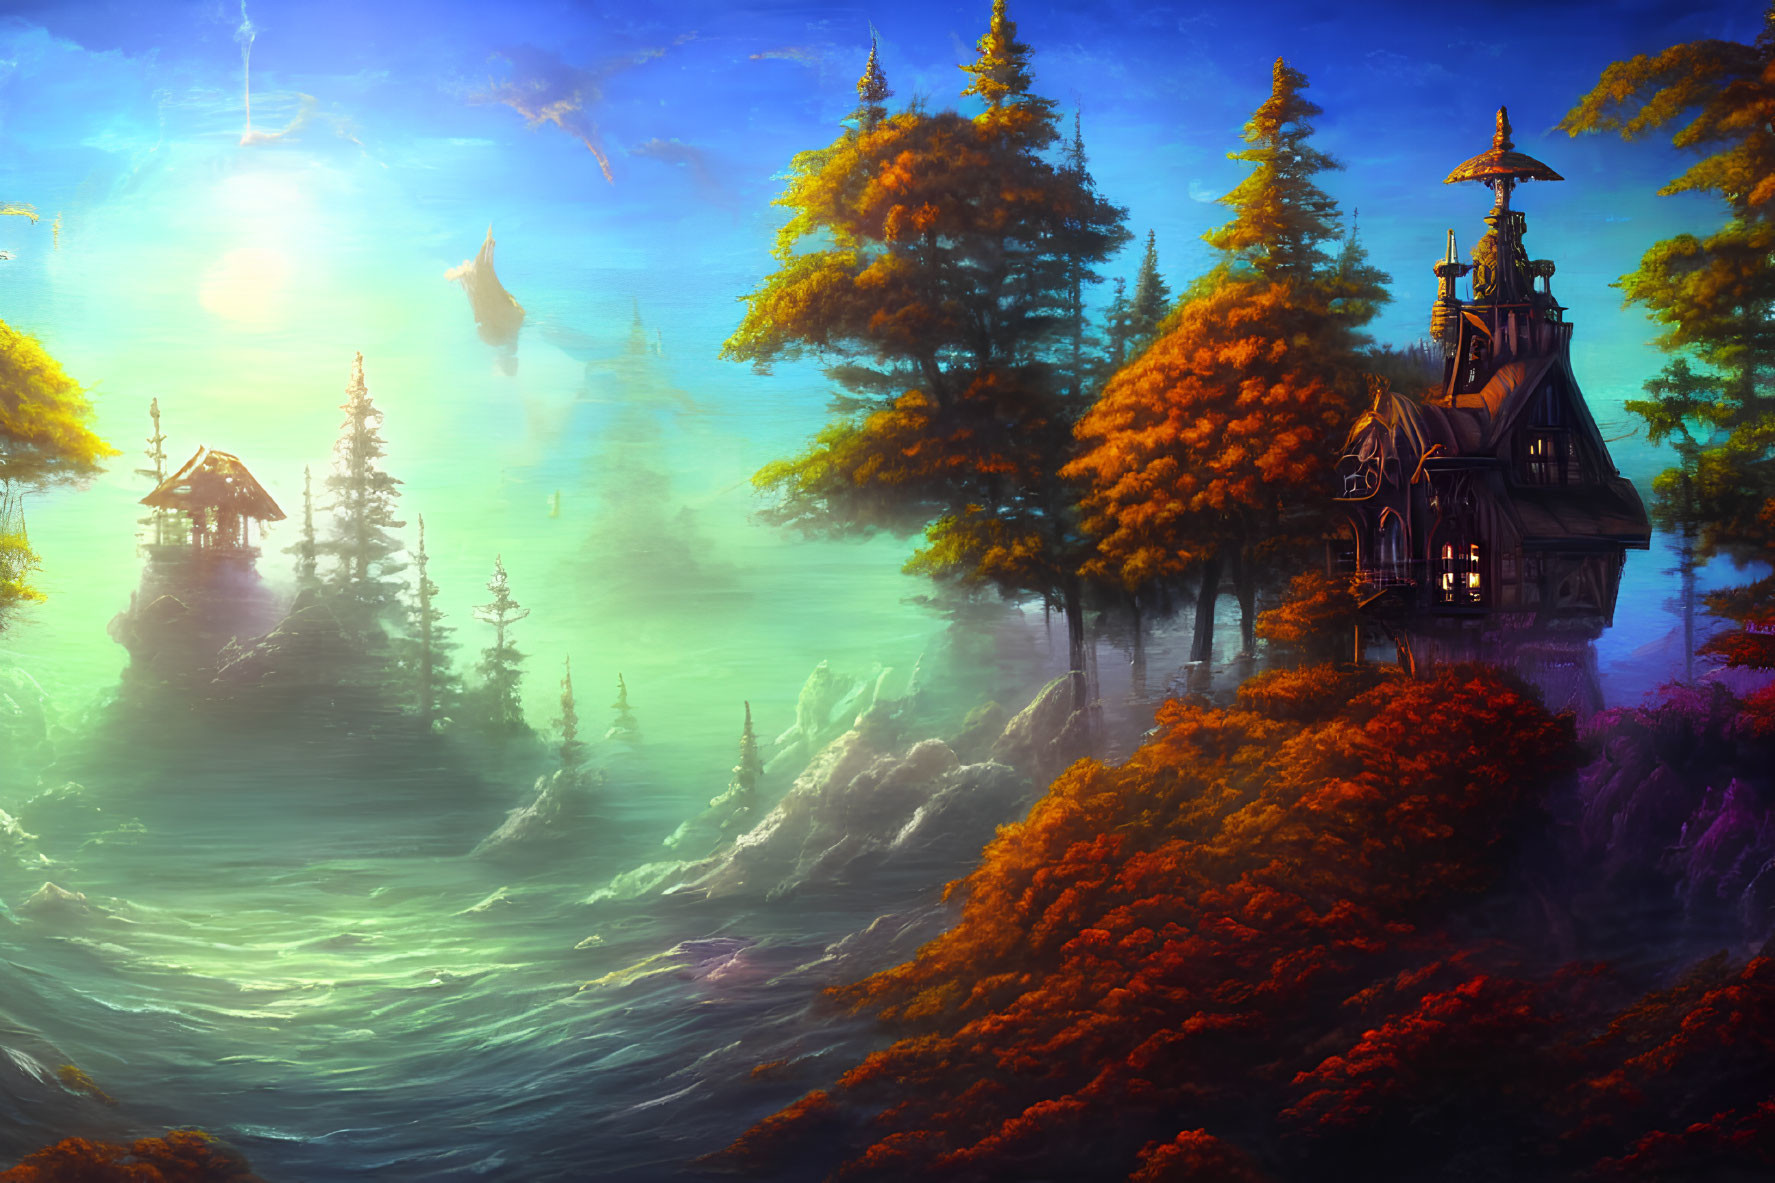 Fantasy landscape with mystical house, autumn trees, mist, and floating islands